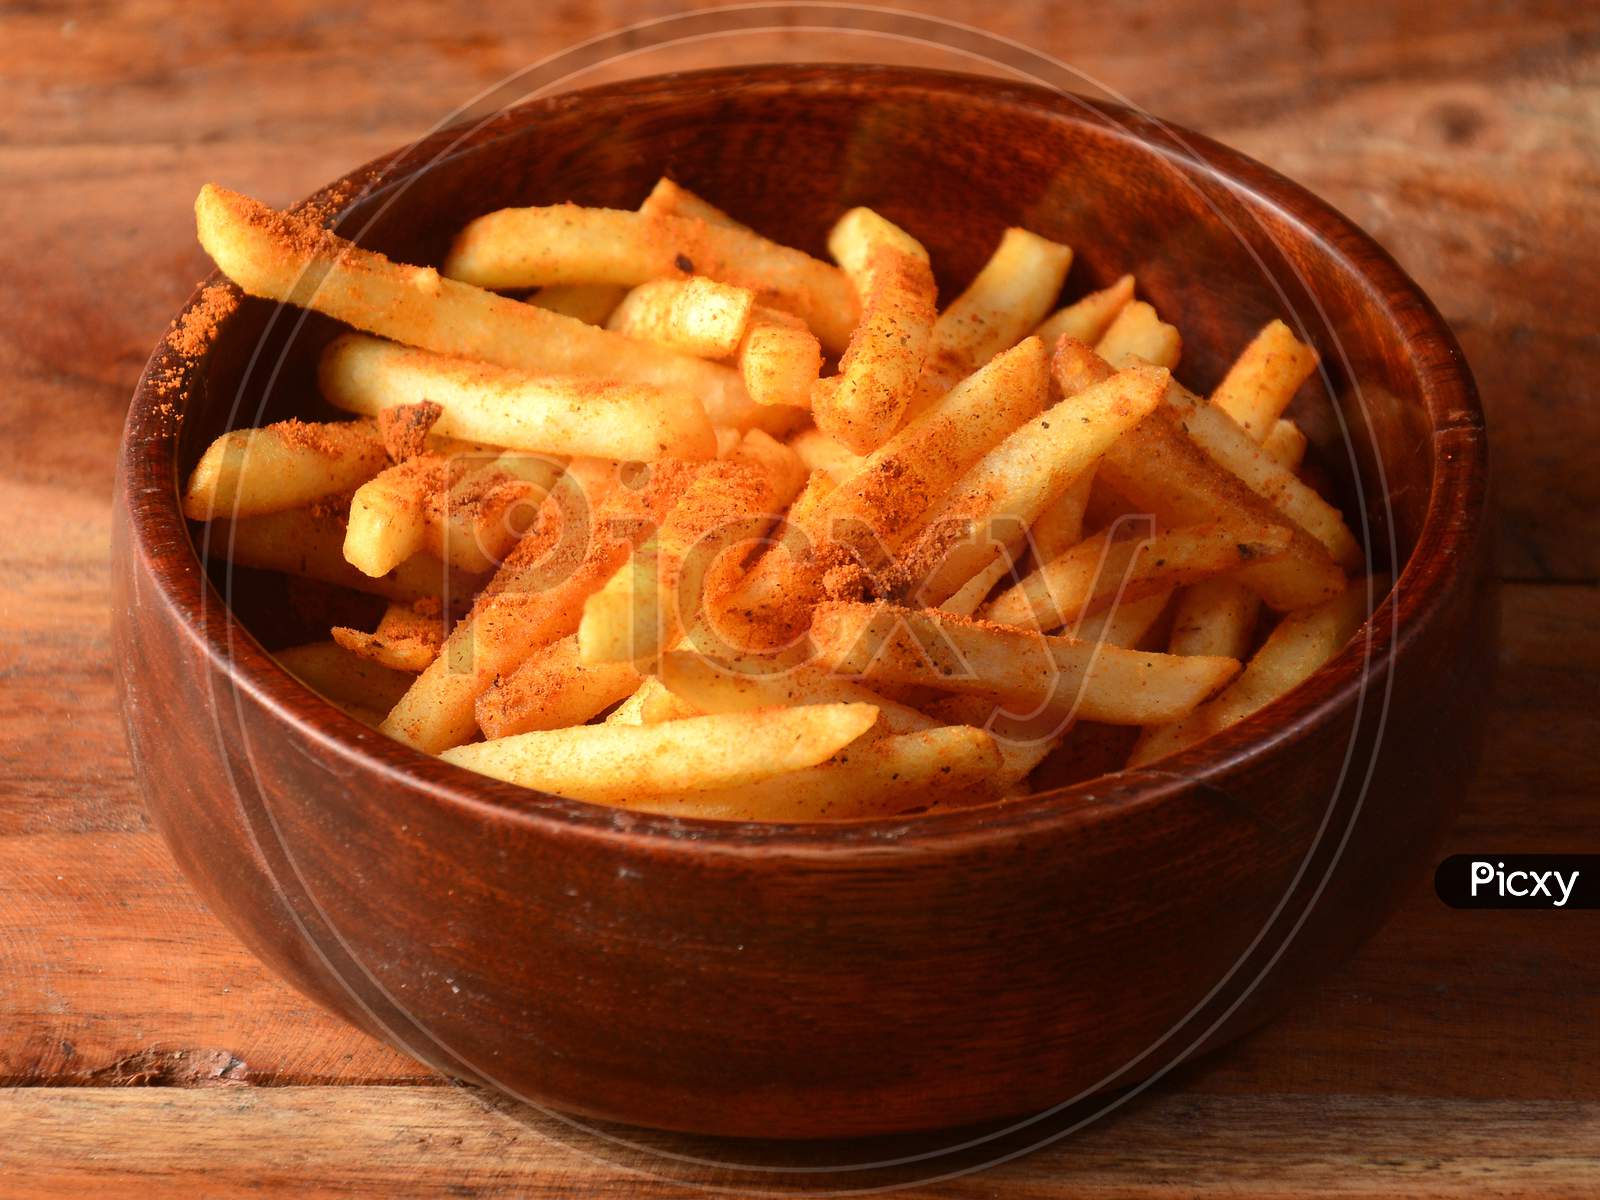 Tasty Spicy Peri Peri French Fries Served In A Wooden Bowl Over A Rustic Wooden Background, Selective Focus